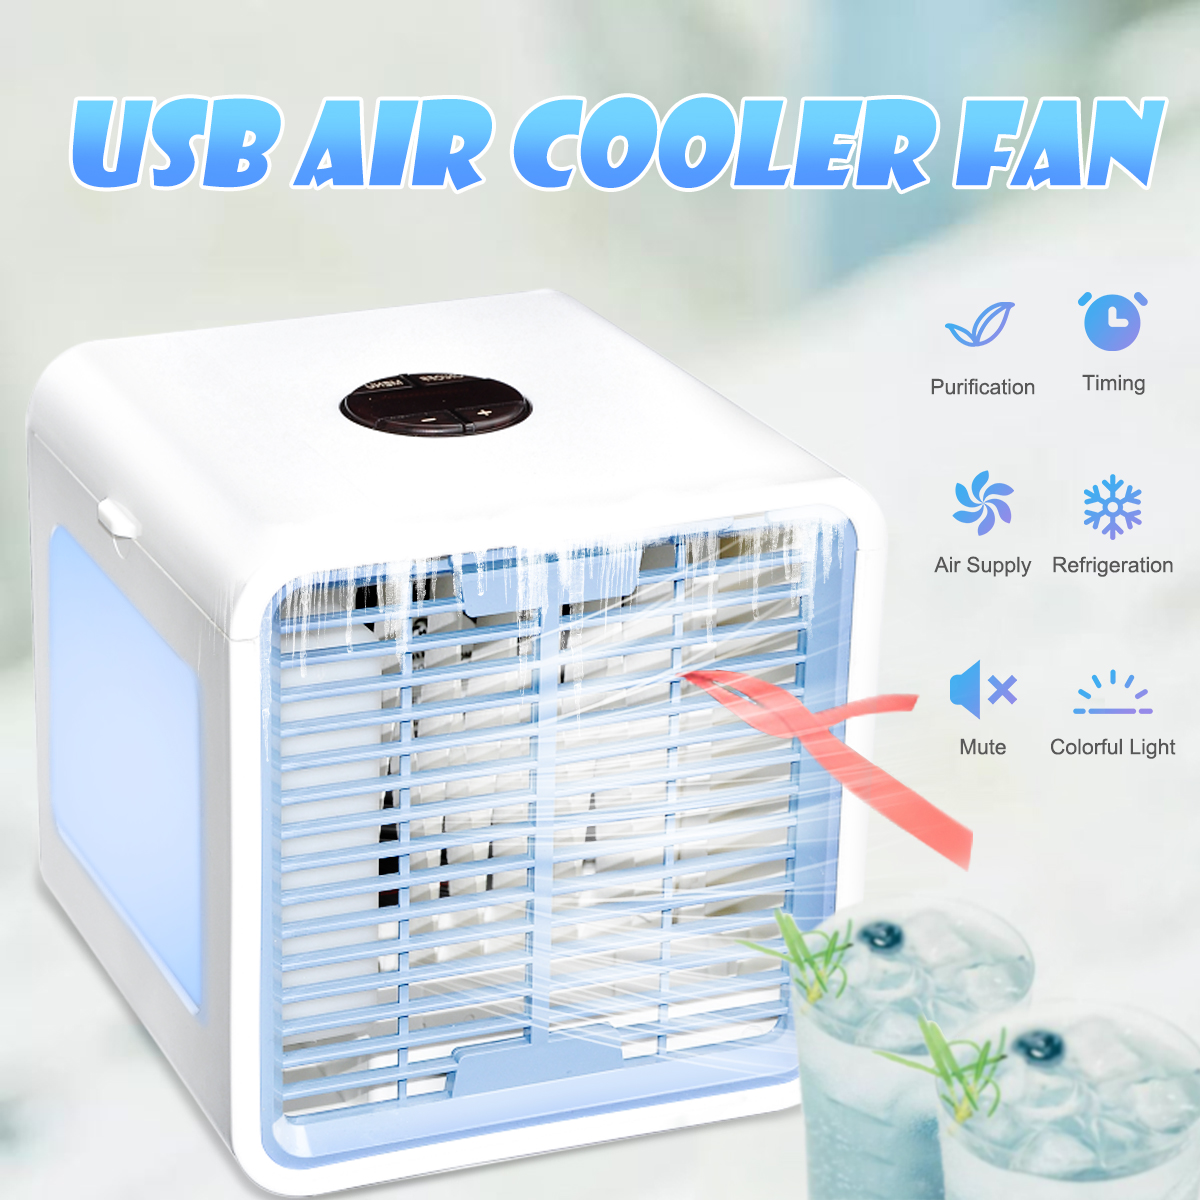 Display-Personal-Air-Cooler-USB-Portable-3-In-1-Refrigeration-Humidification-Purification-LED-Table--1516587-2